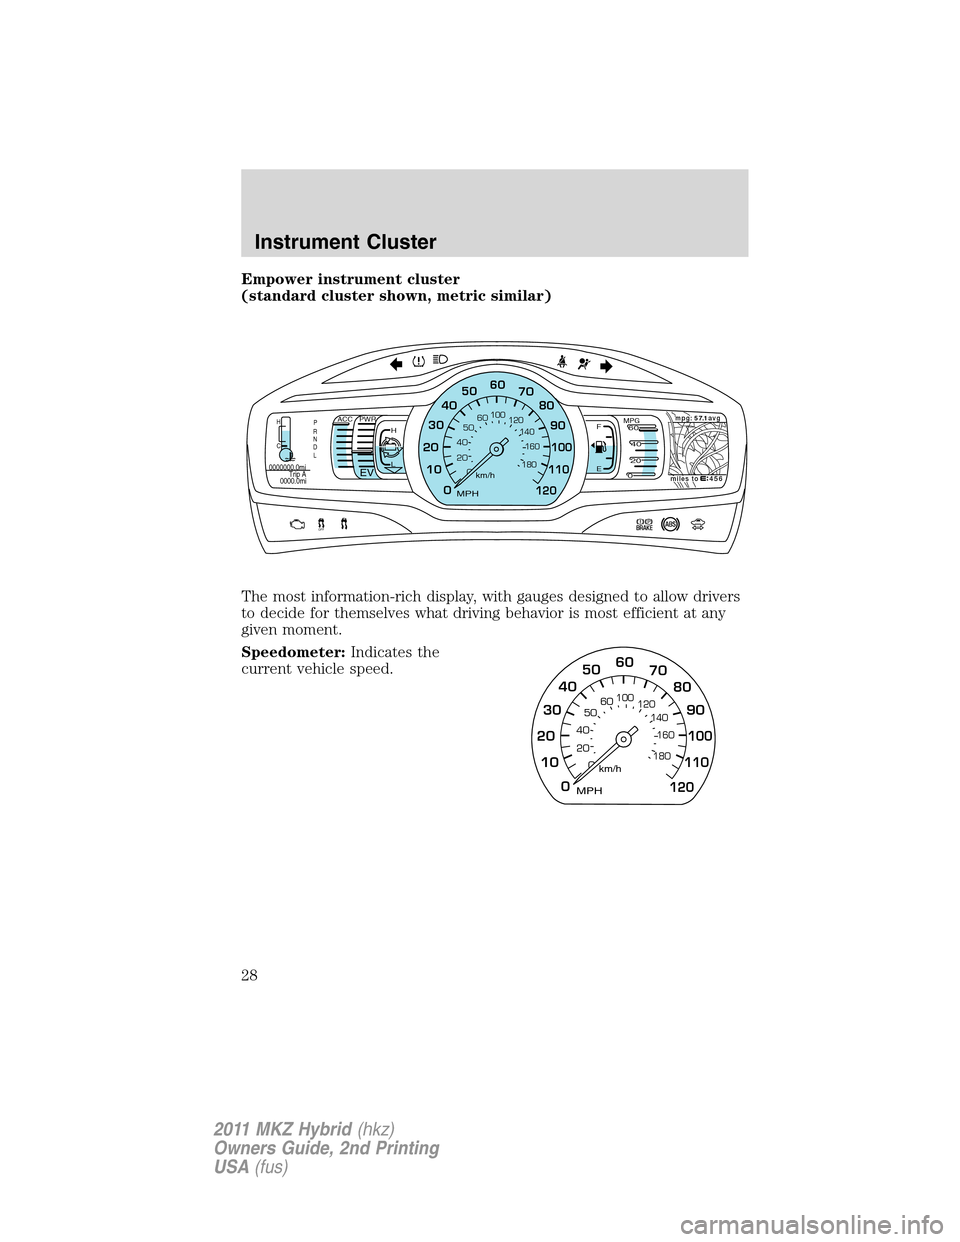 LINCOLN MKZ HYBRID 2011  Owners Manual Empower instrument cluster
(standard cluster shown, metric similar)
The most information-rich display, with gauges designed to allow drivers
to decide for themselves what driving behavior is most effi